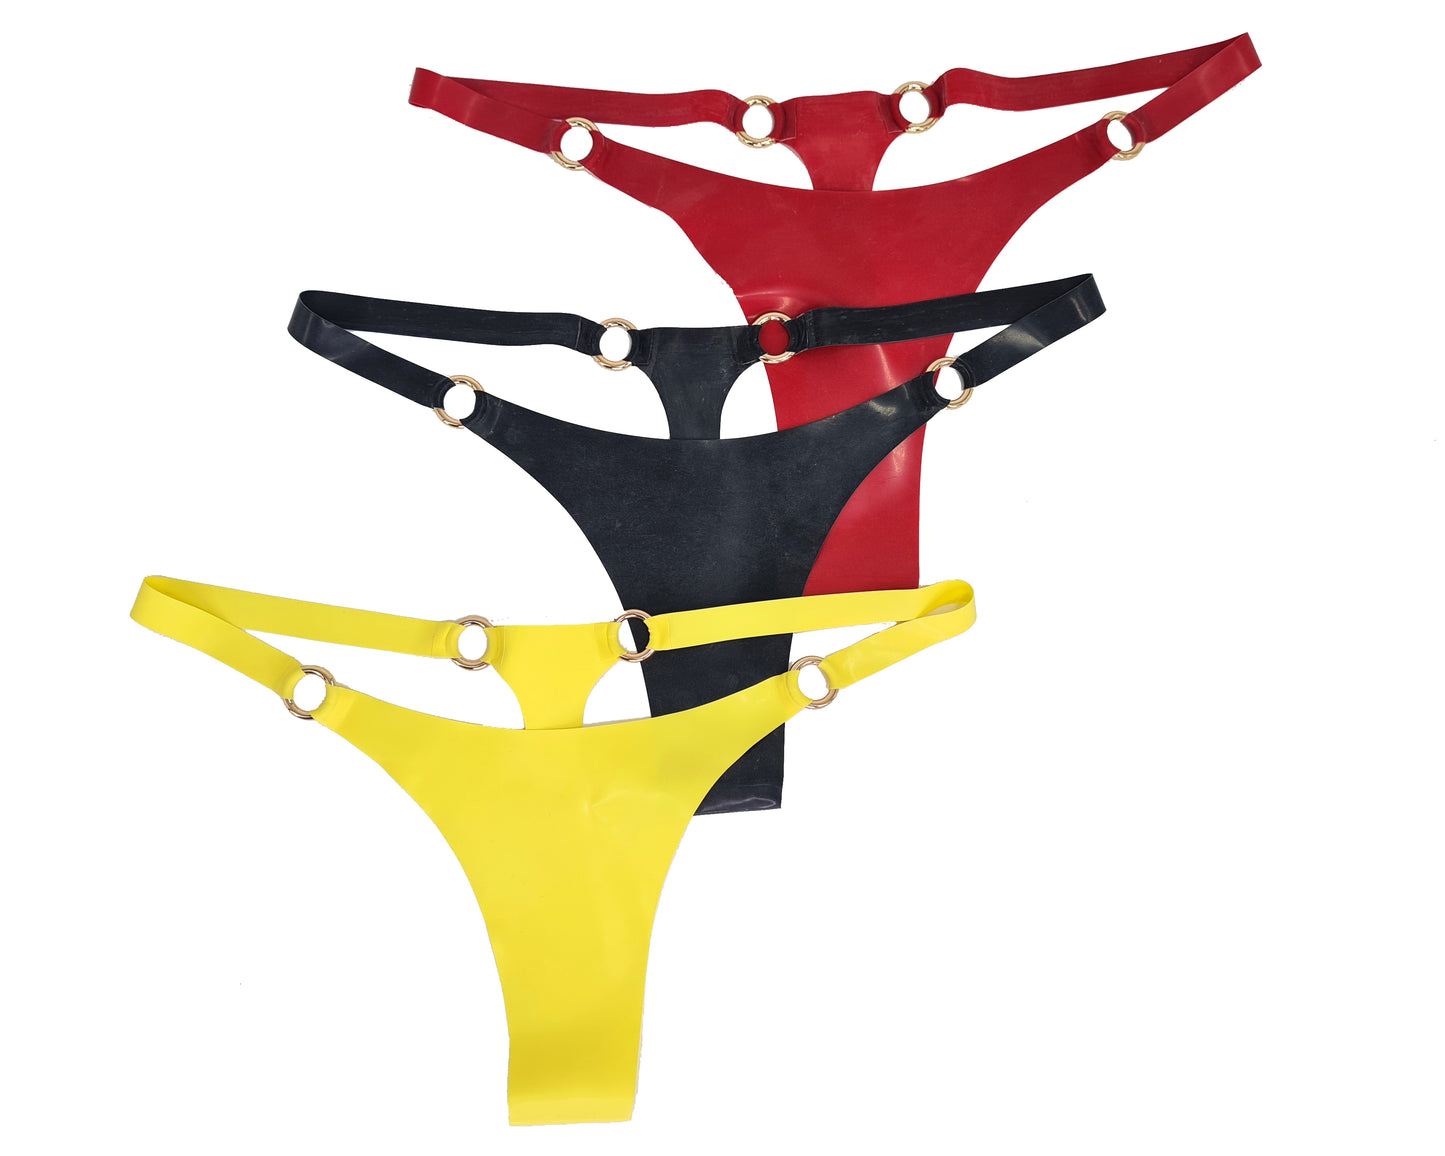 Latex thong with rings (silver, gold or rainbow rings)